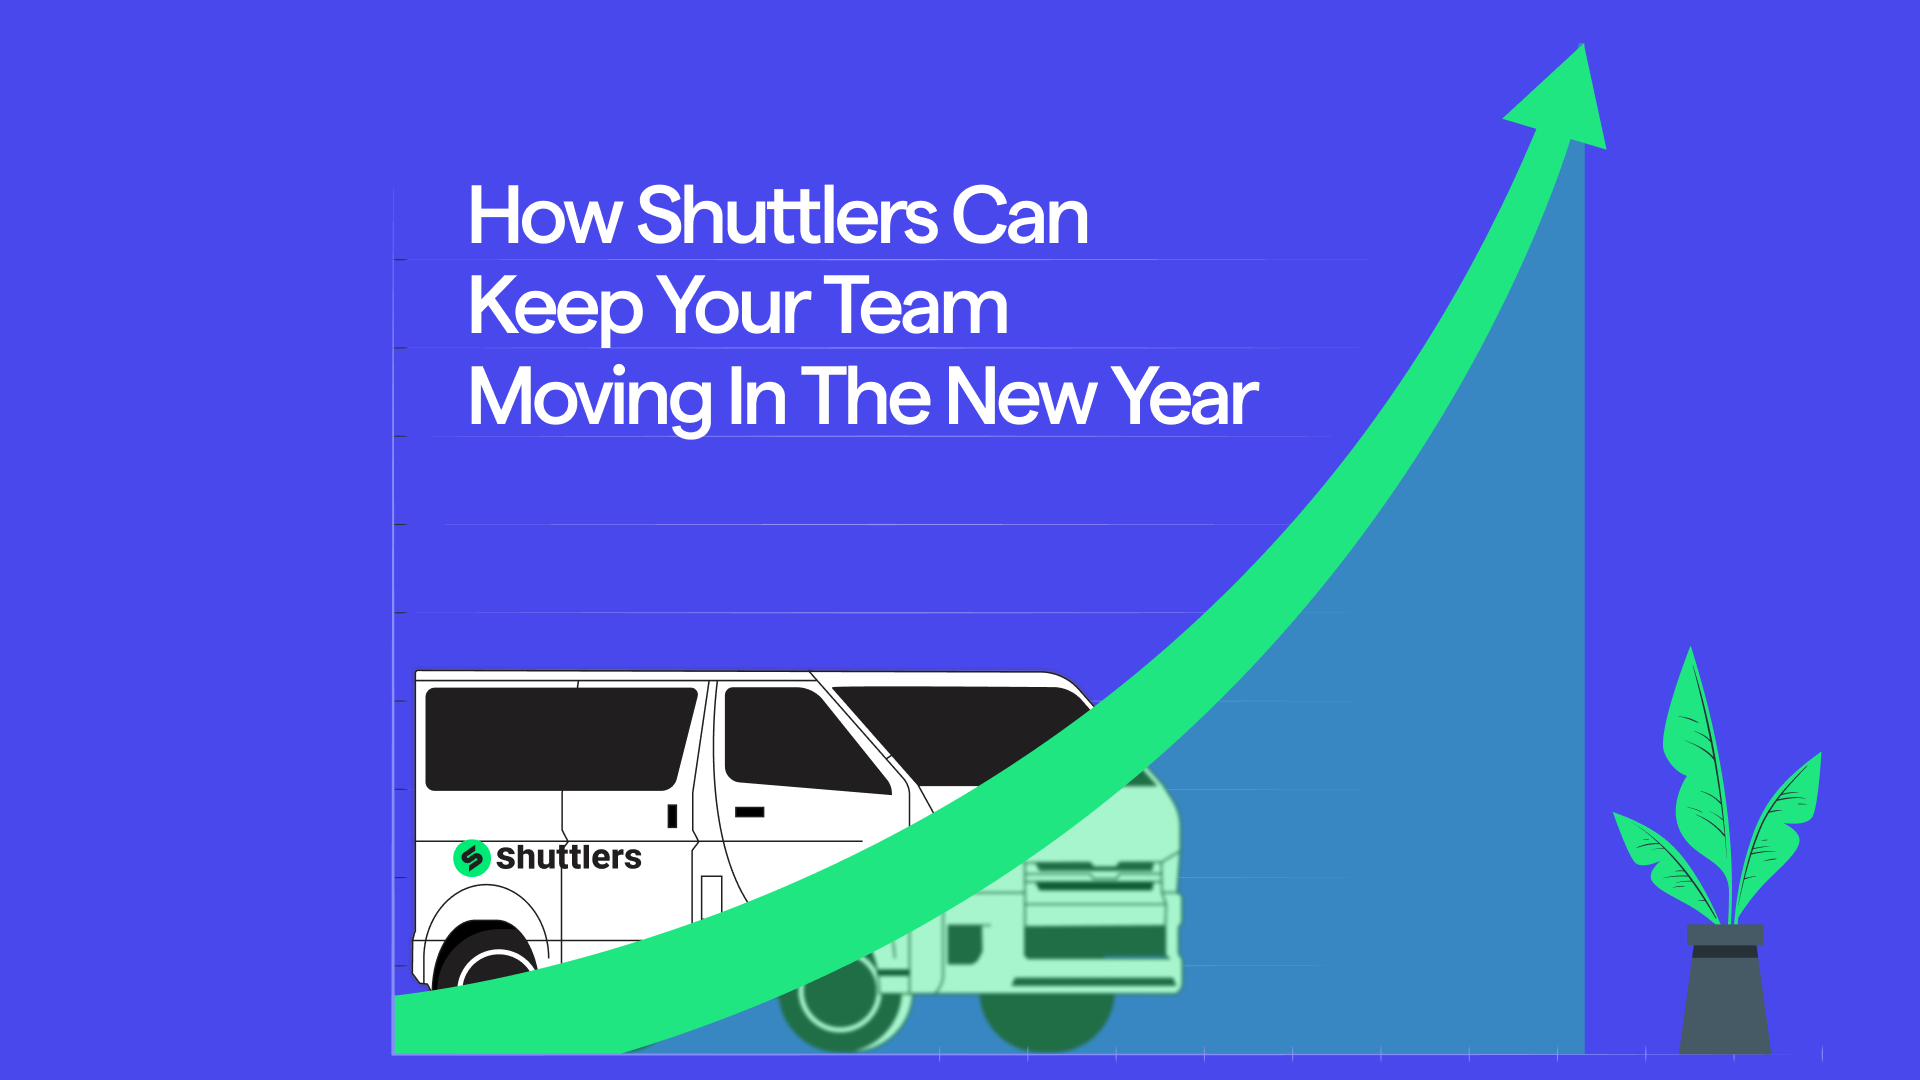 How Shuttlers Can Keep Your Team Moving In The New Year